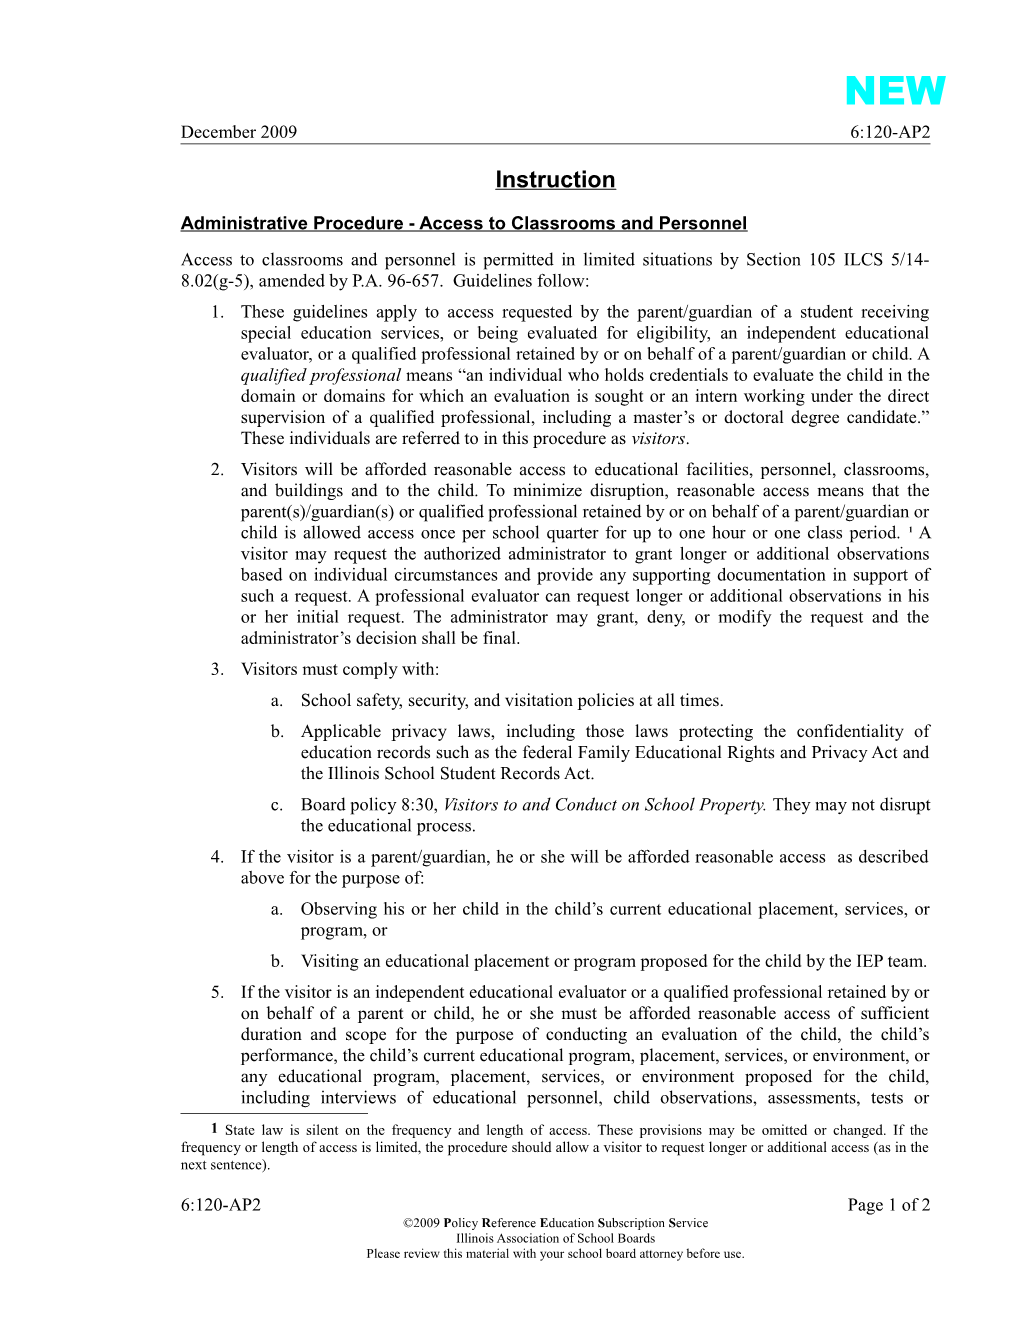 Administrative Procedure -Access to Classrooms and Personnel